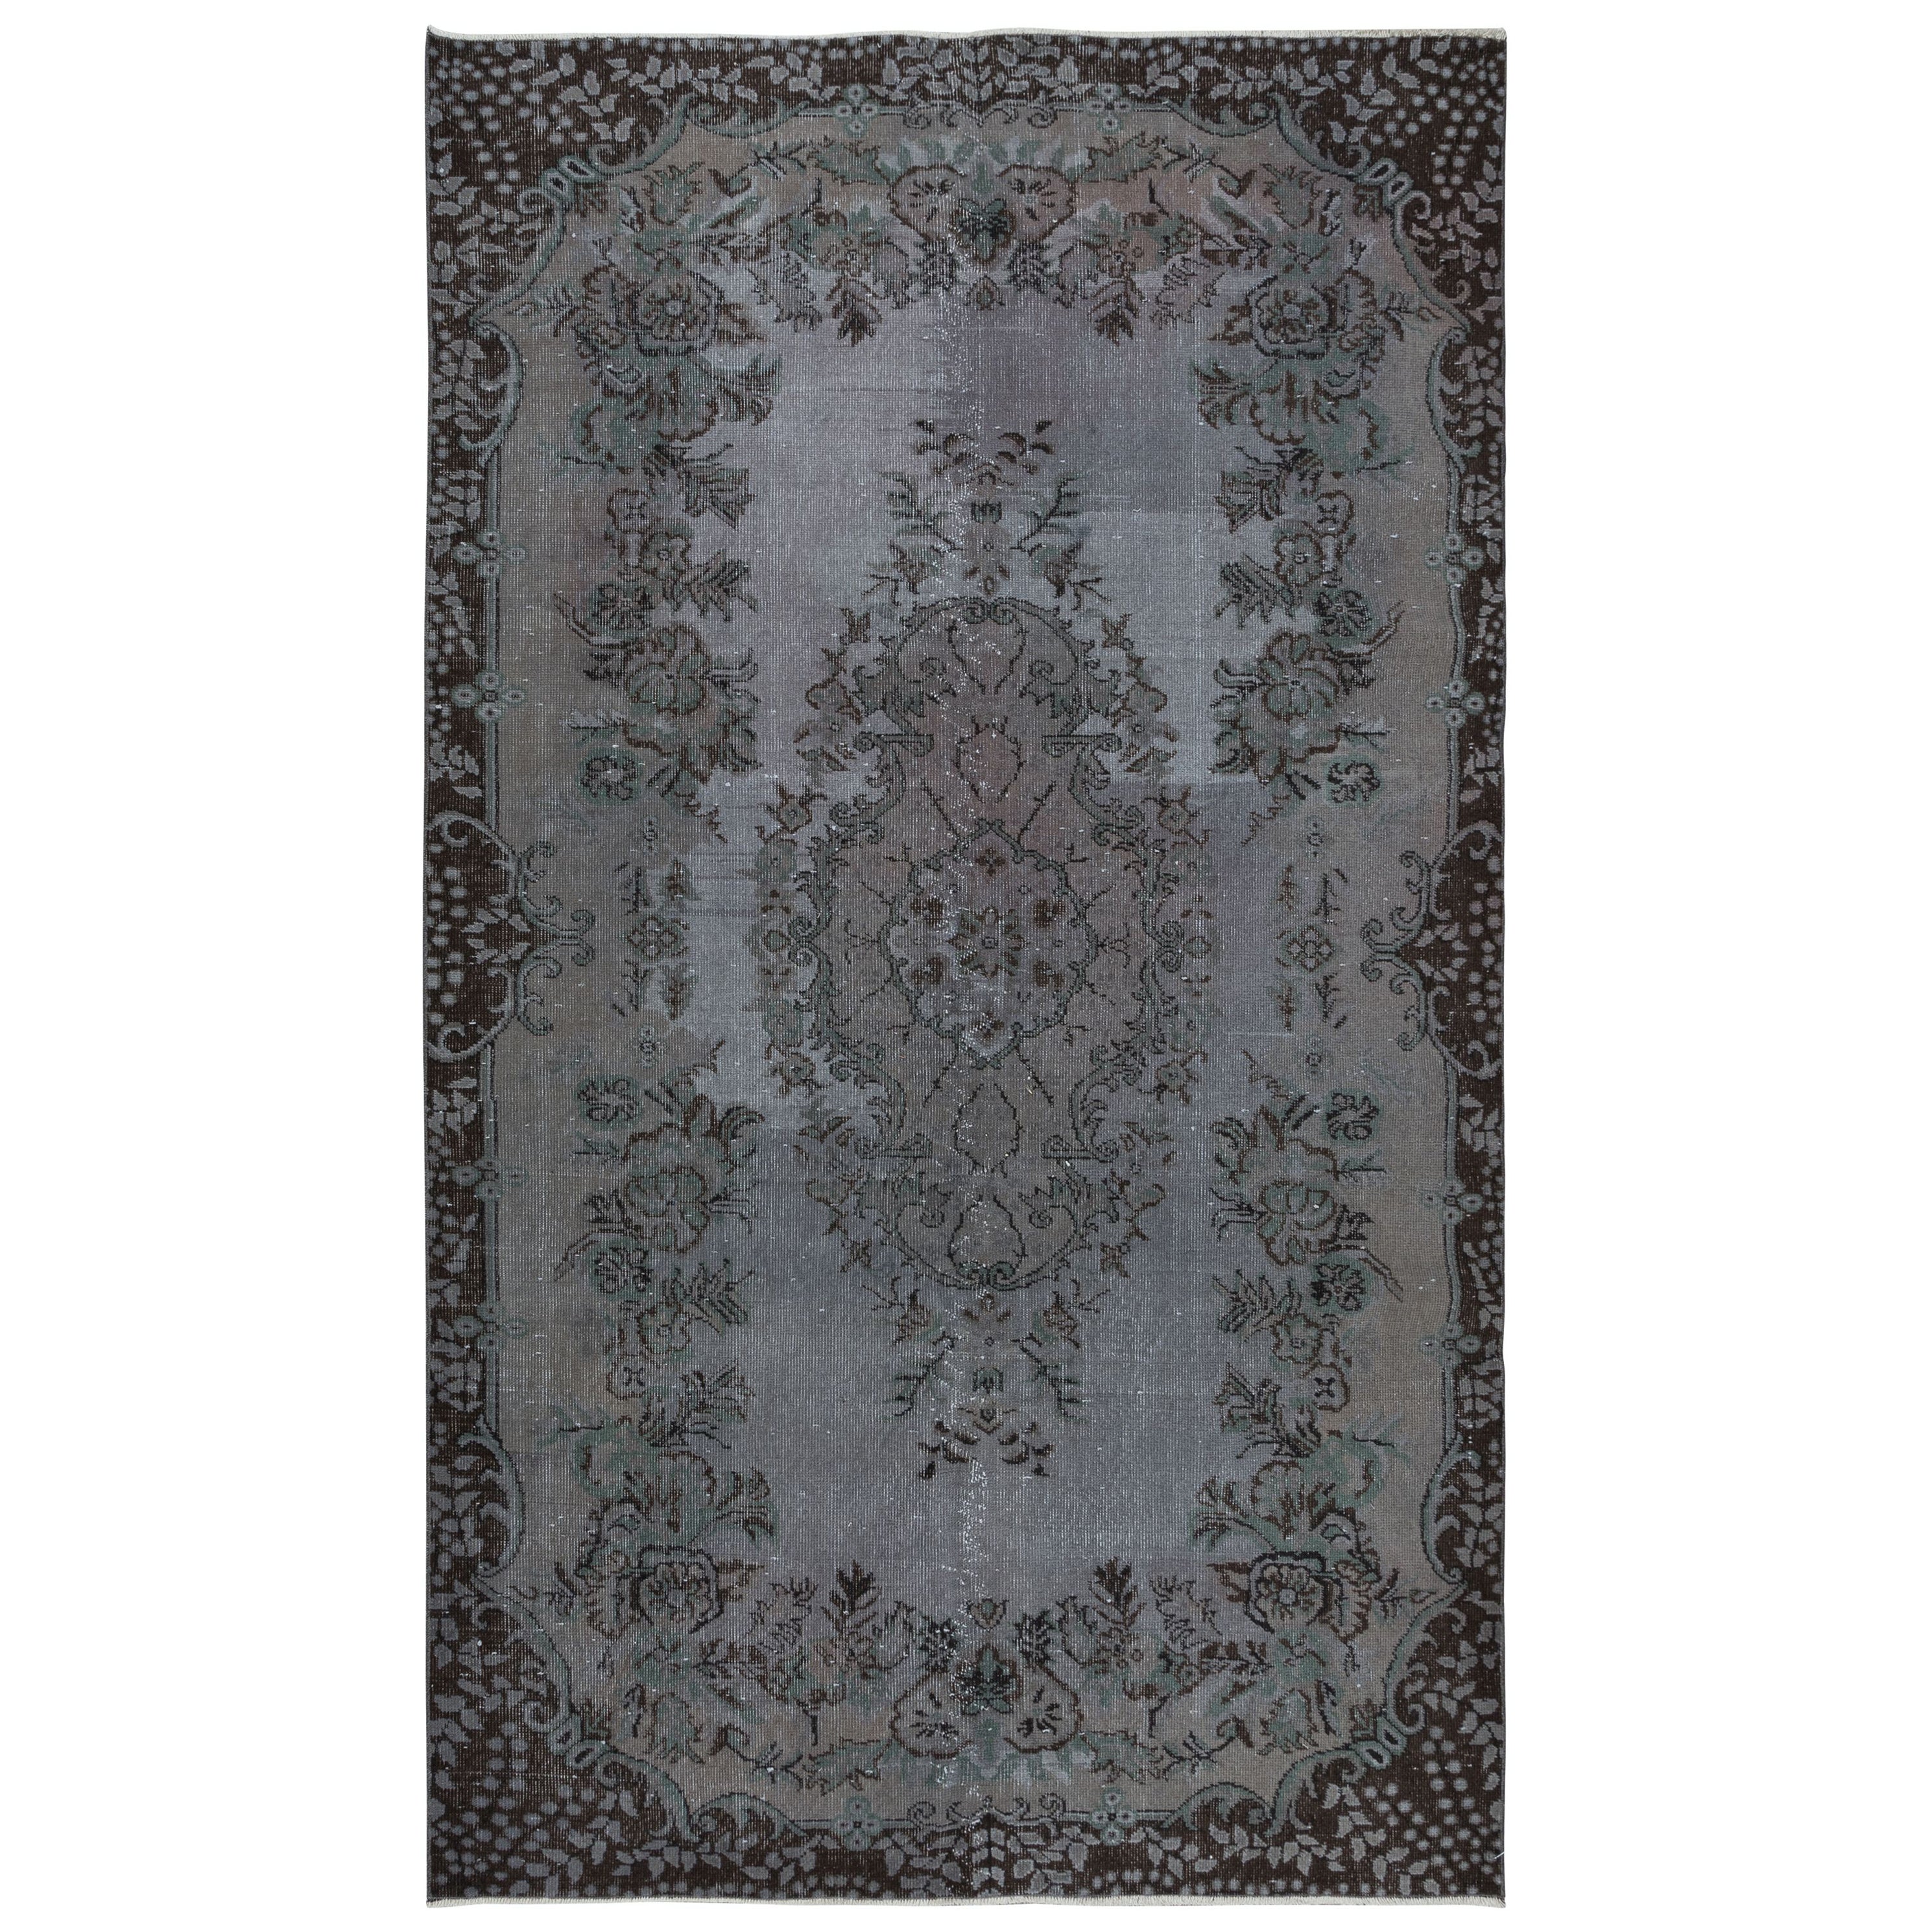 5.6x9 Ft Hand Knotted Rug with Floral Medallion, Gray Modern Turkish Carpet For Sale